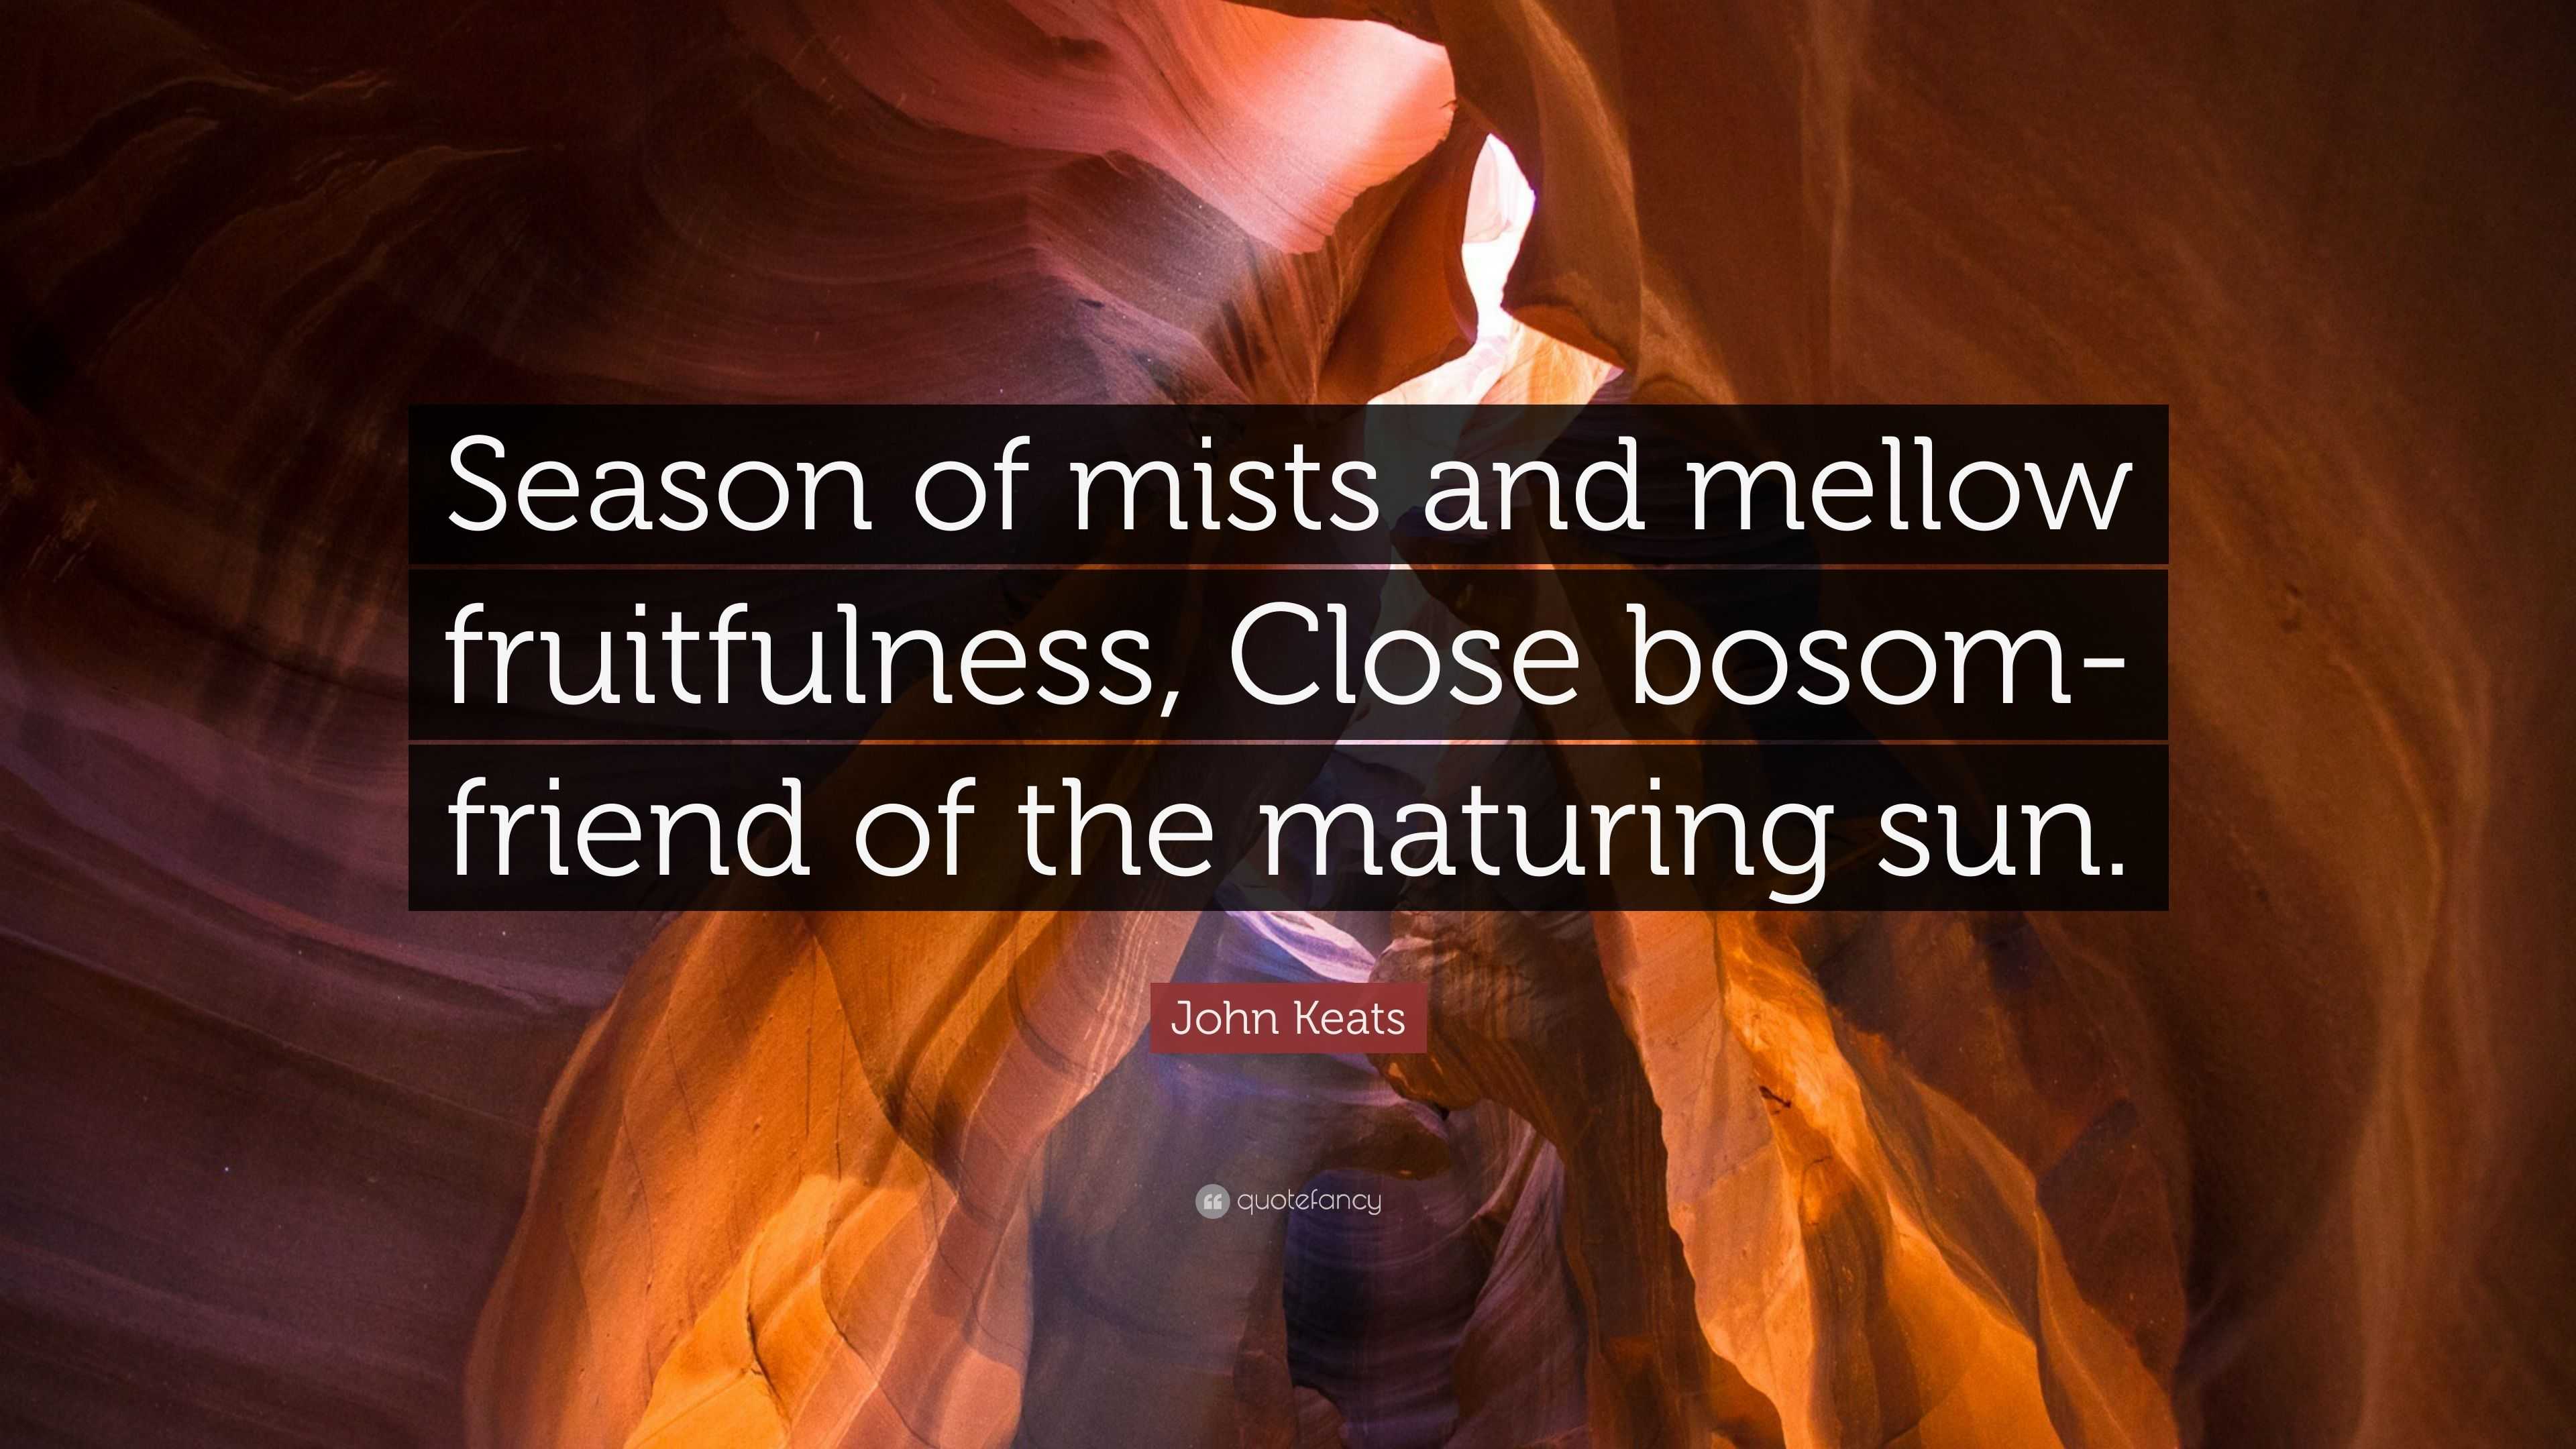 the season of mists and mellow fruitfulness